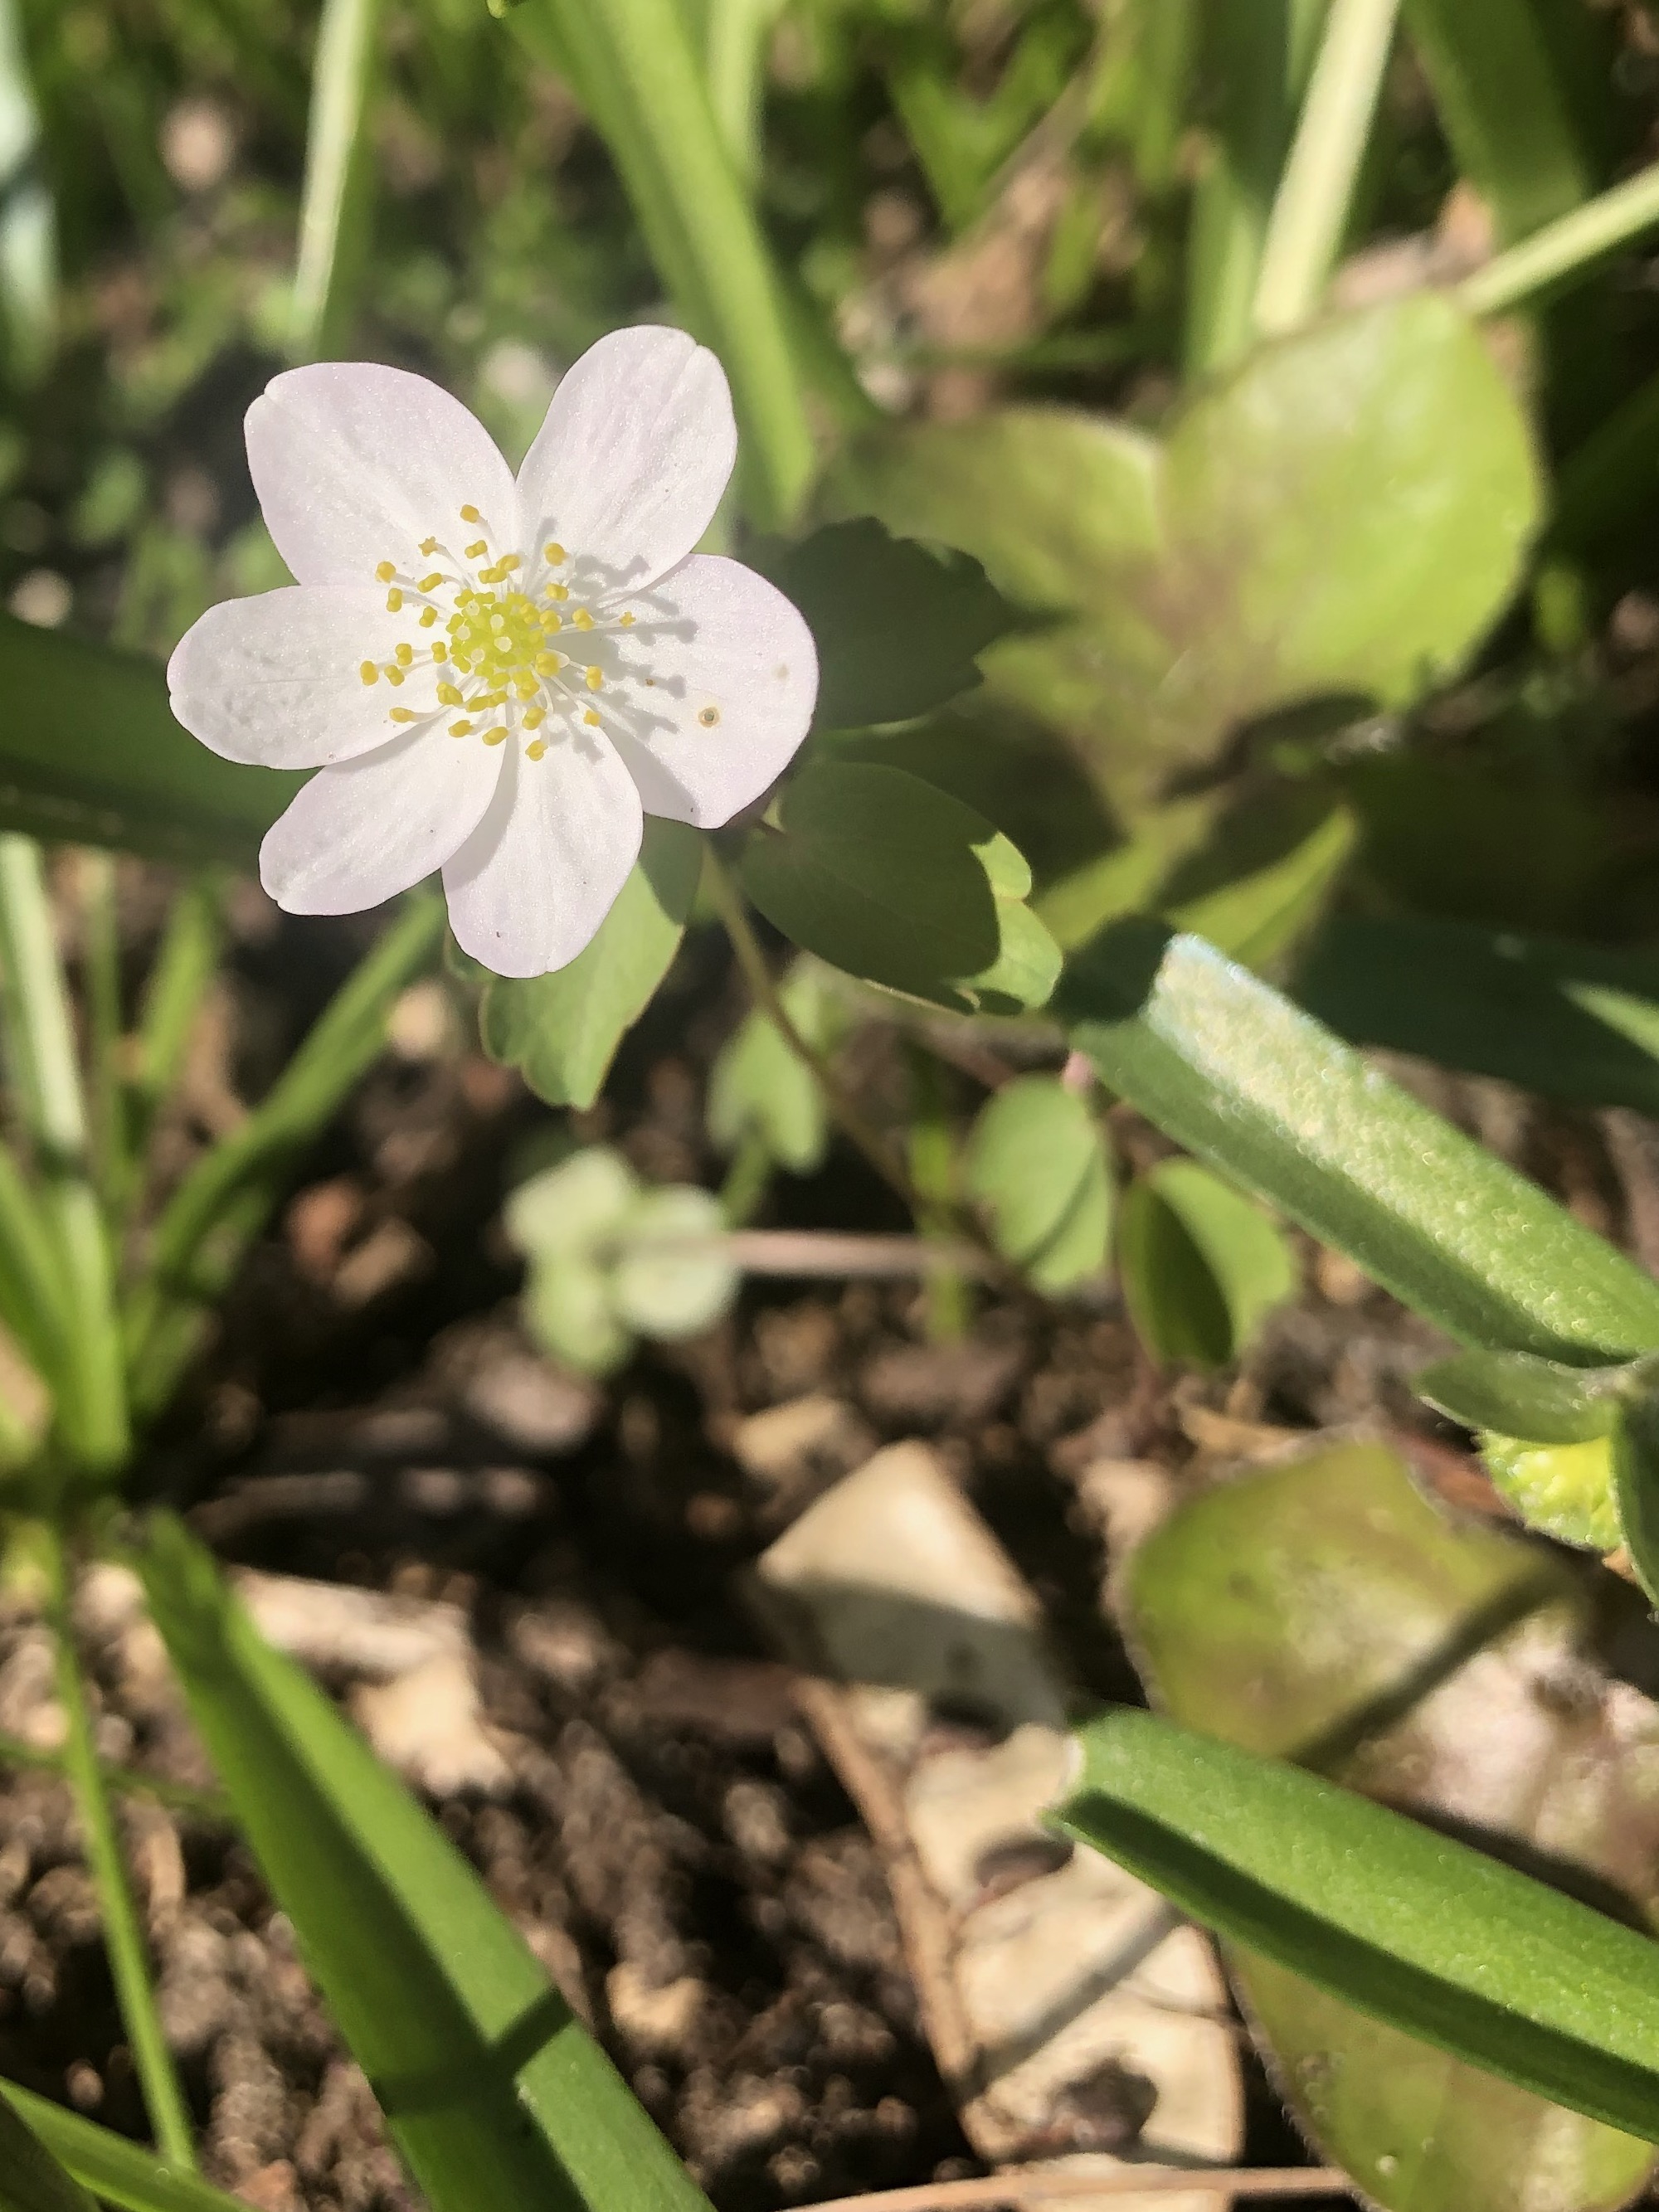 Rue-anemone near Agawa Path (growing through Hepatica leaves) in Madison, Wisconsin on April 17, 2021.